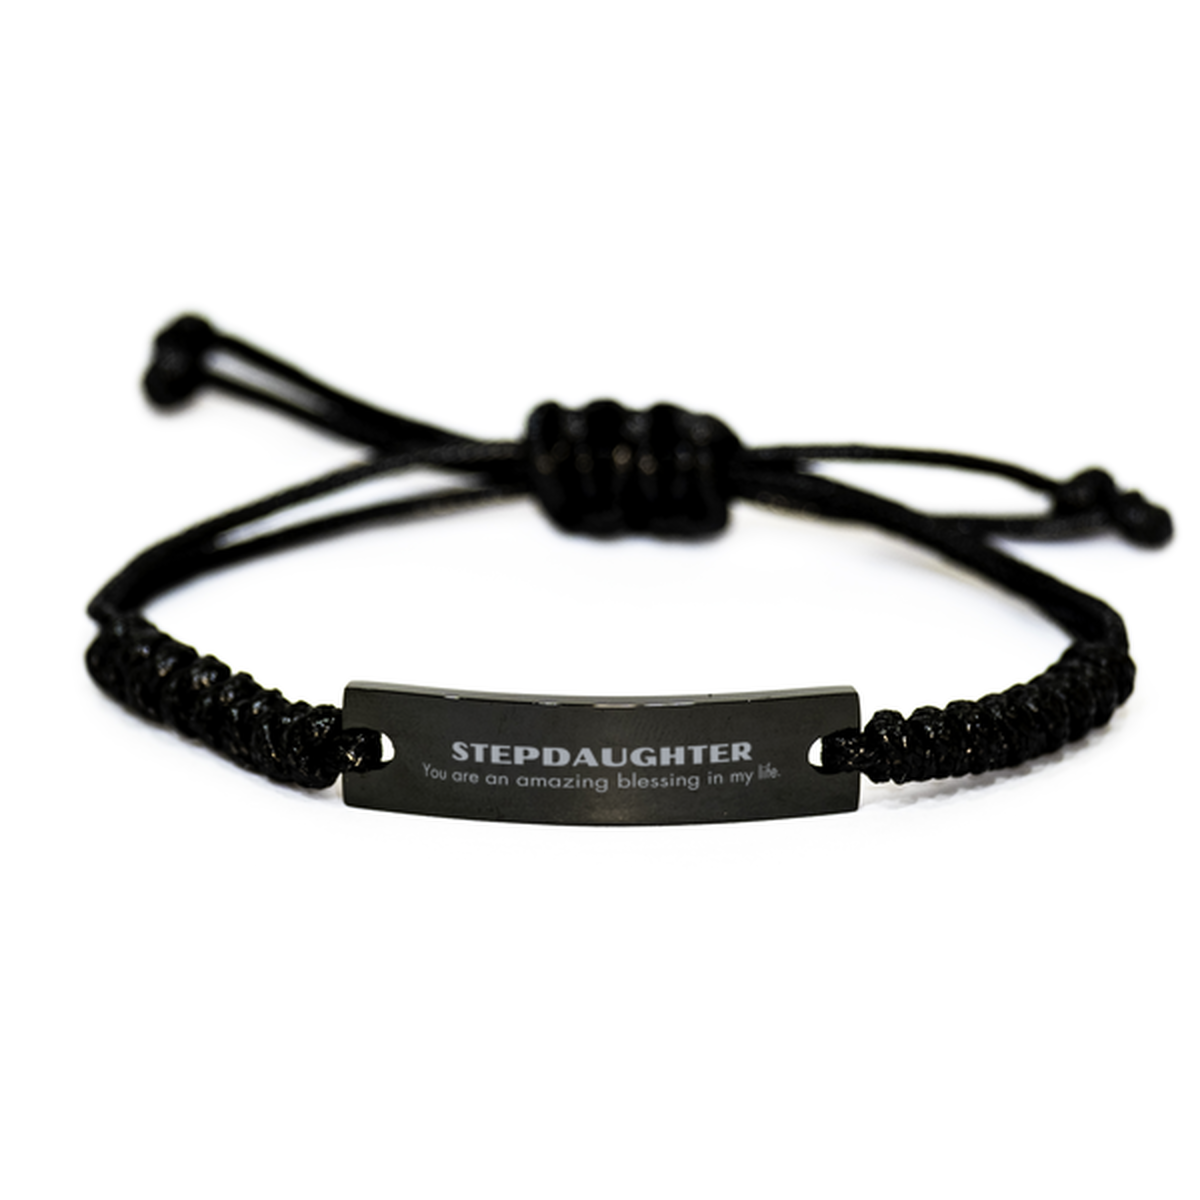 Stepdaughter Black Rope Bracelet, You are an amazing blessing in my life, Thank You Gifts For Stepdaughter, Inspirational Birthday Christmas Unique Gifts For Stepdaughter